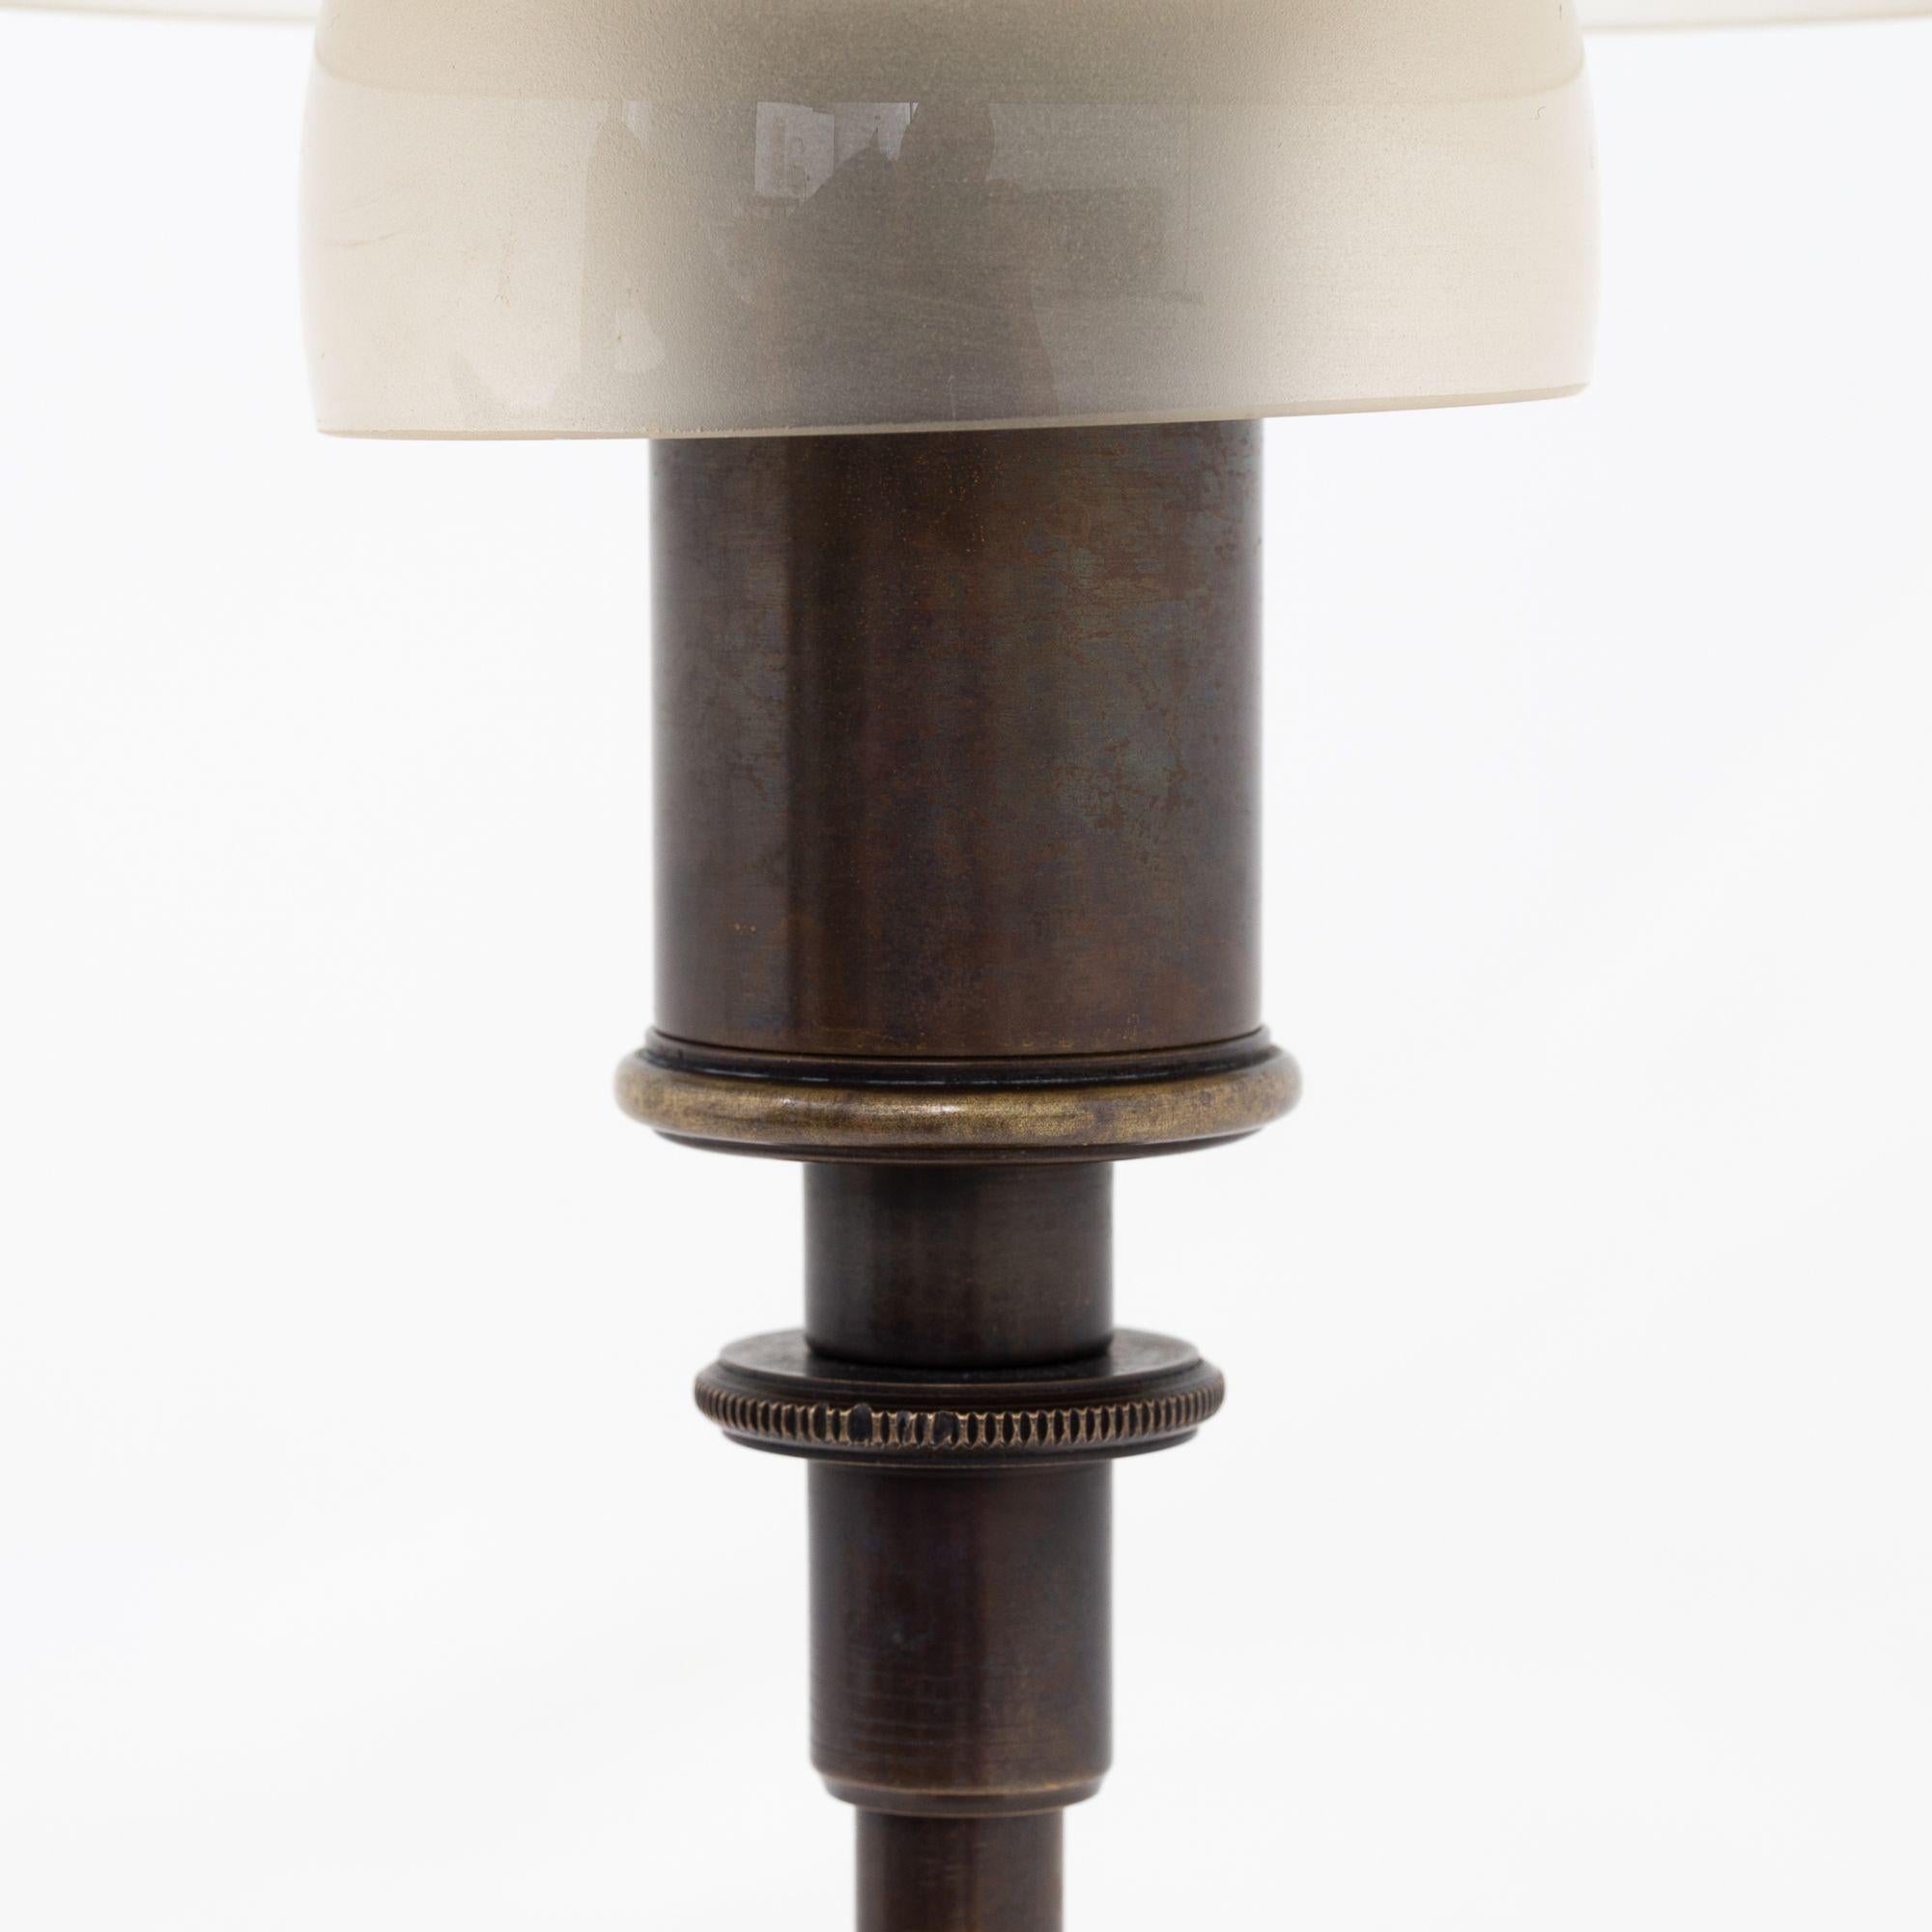 Patinated Table lamp by Poul Henningsen